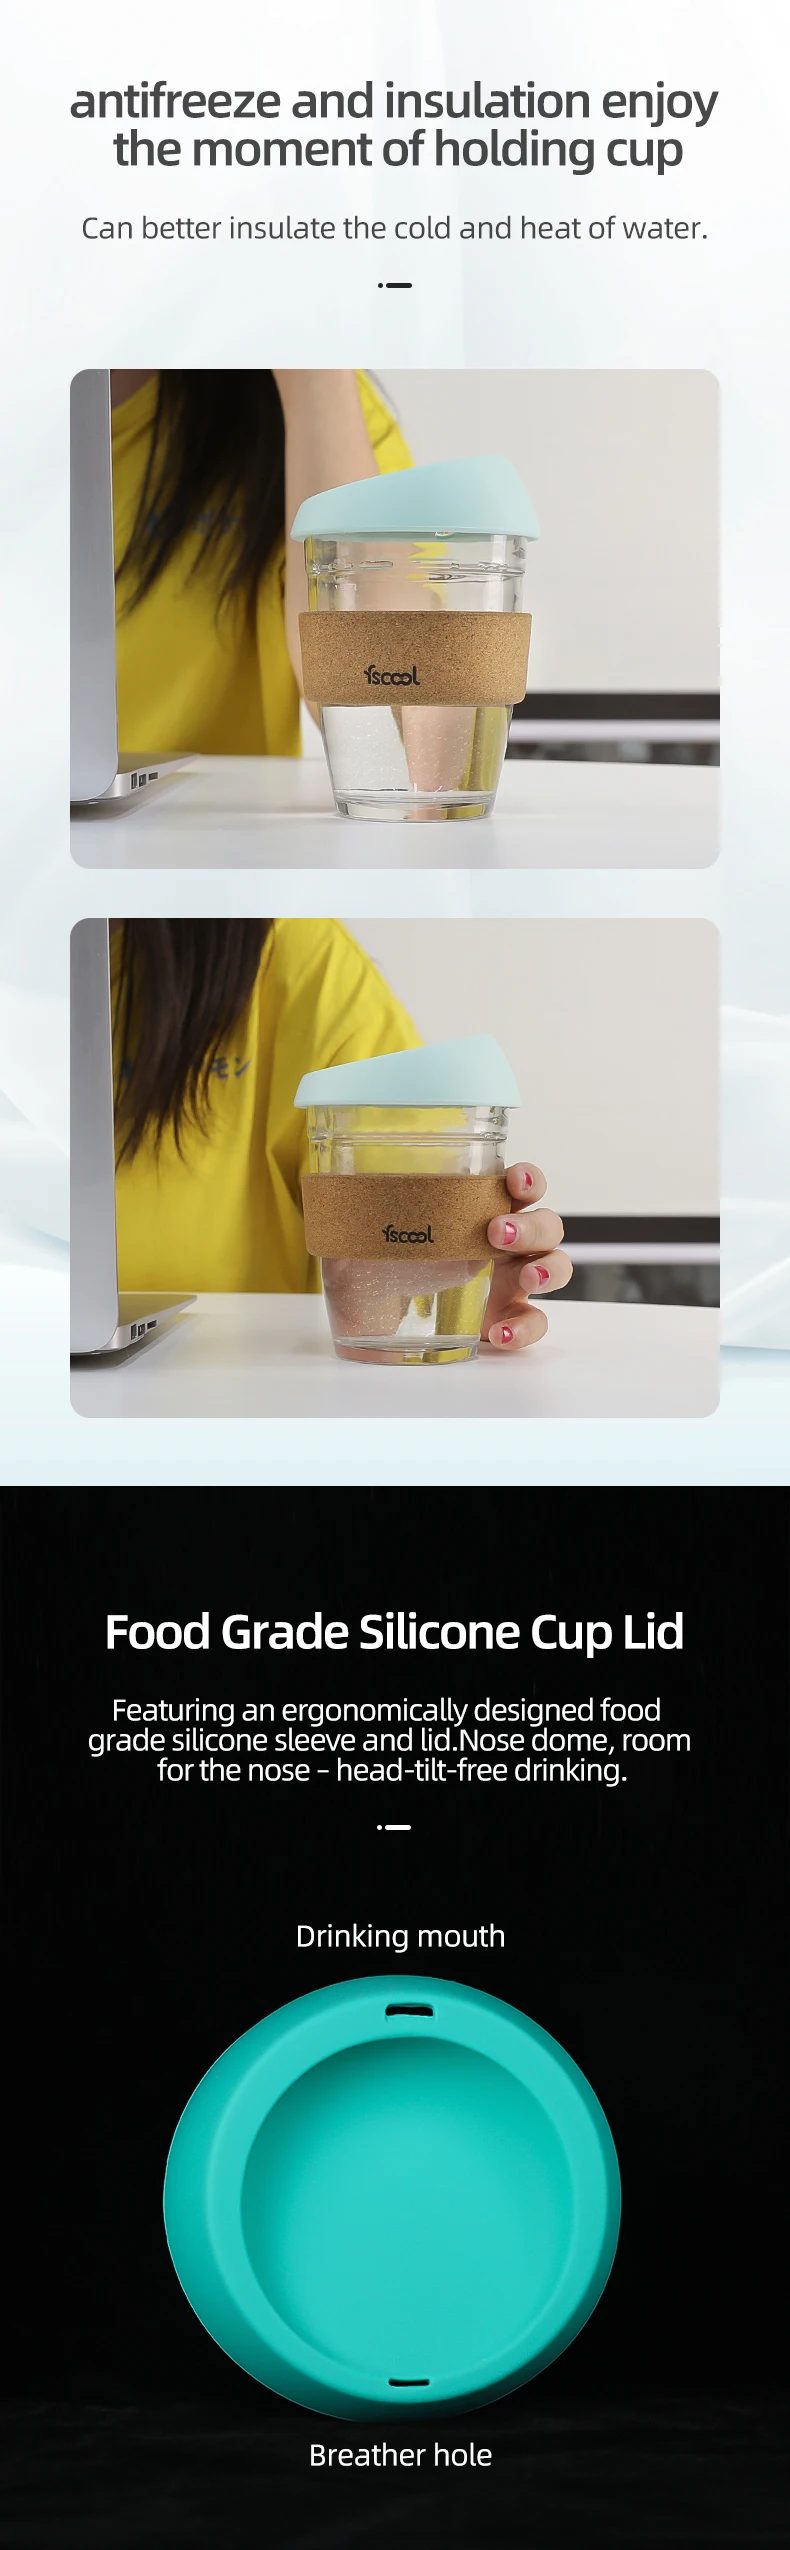 Fscool Wholesale Custom 12 oz Eco Friendly Reusable Silicone Glass Coffee Cup With Cork Sleeve